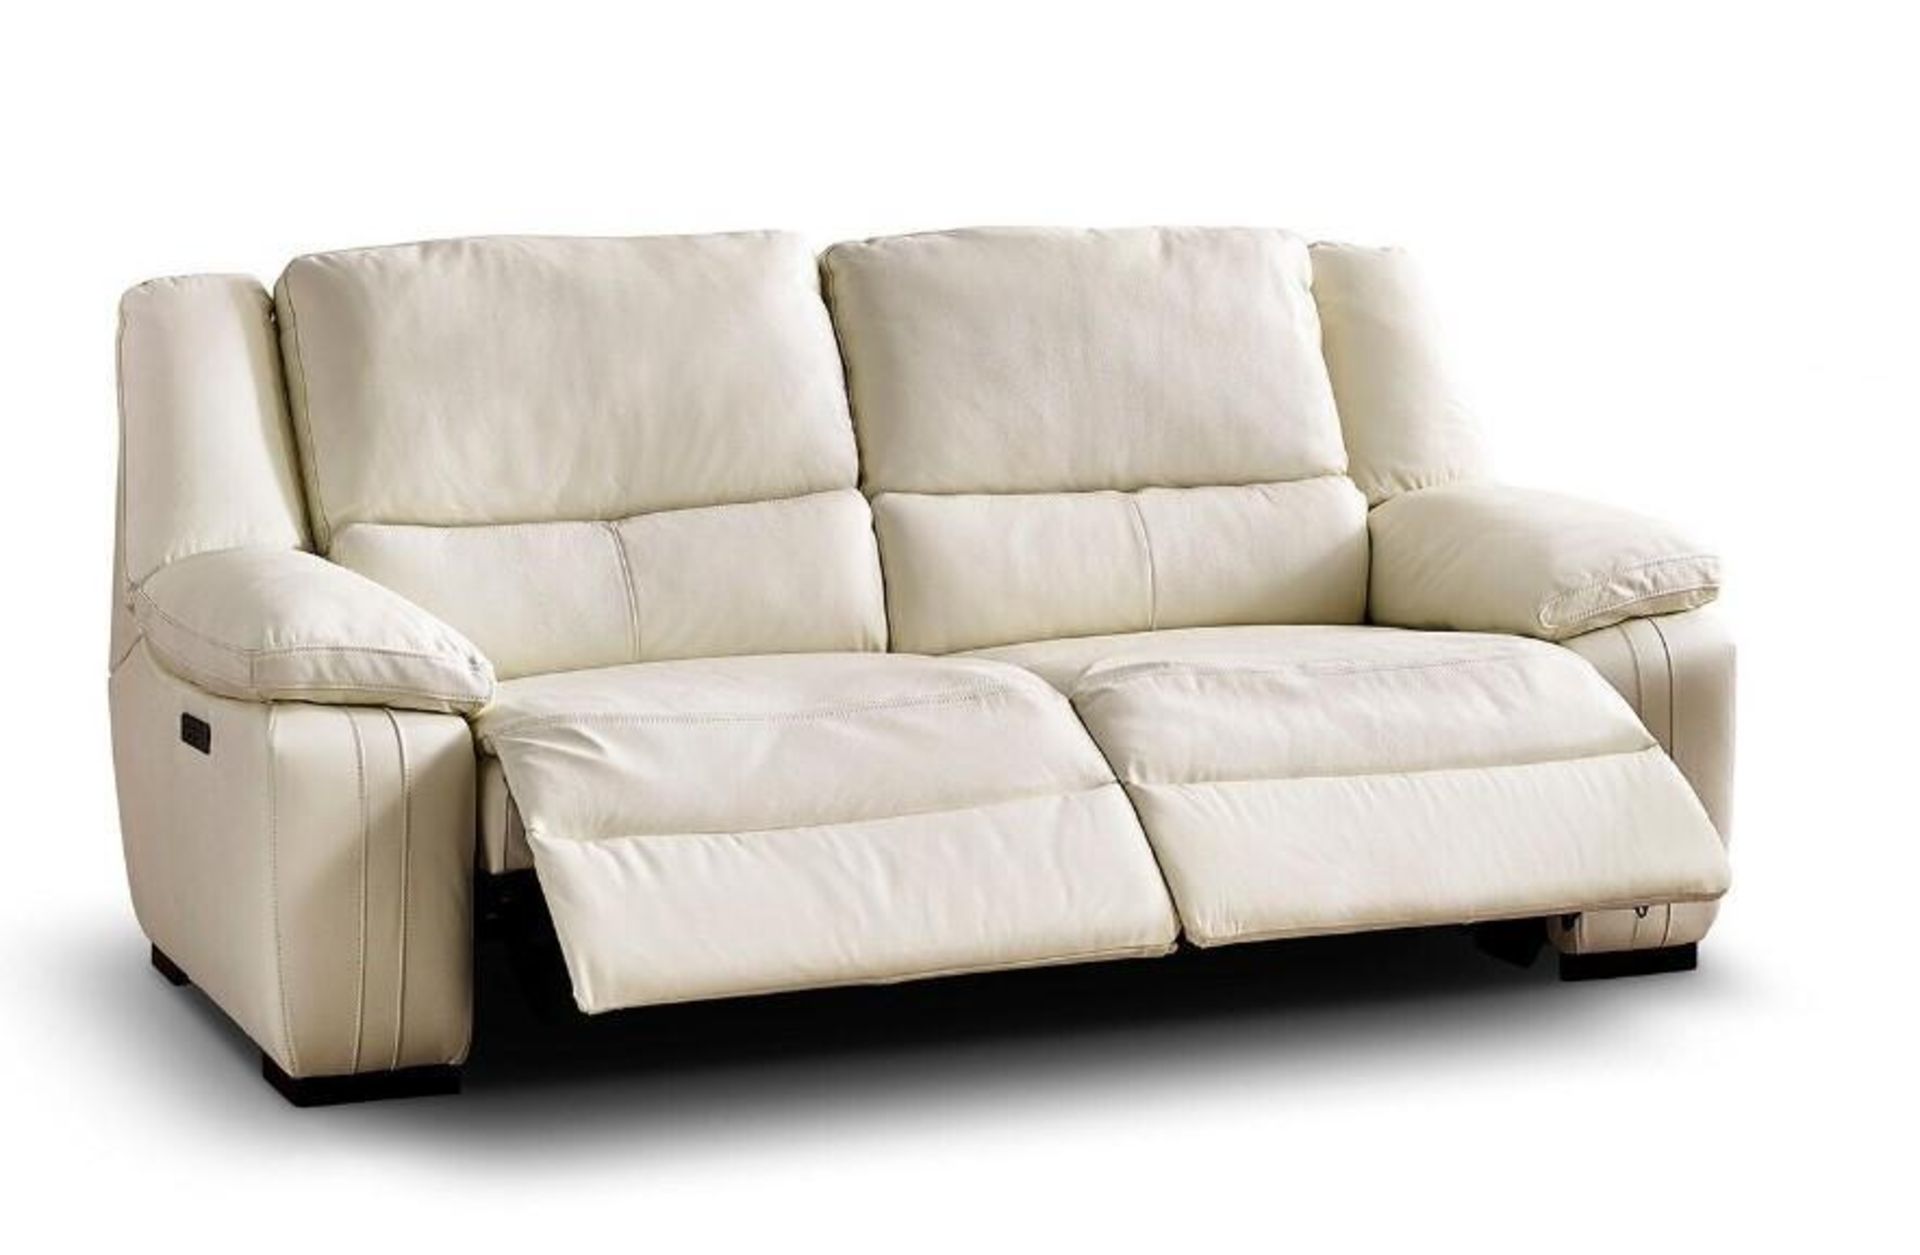 Brand new and boxed SCS Fallon 3 + 2 seater electric reclining sofa in Cream. - Bild 7 aus 7